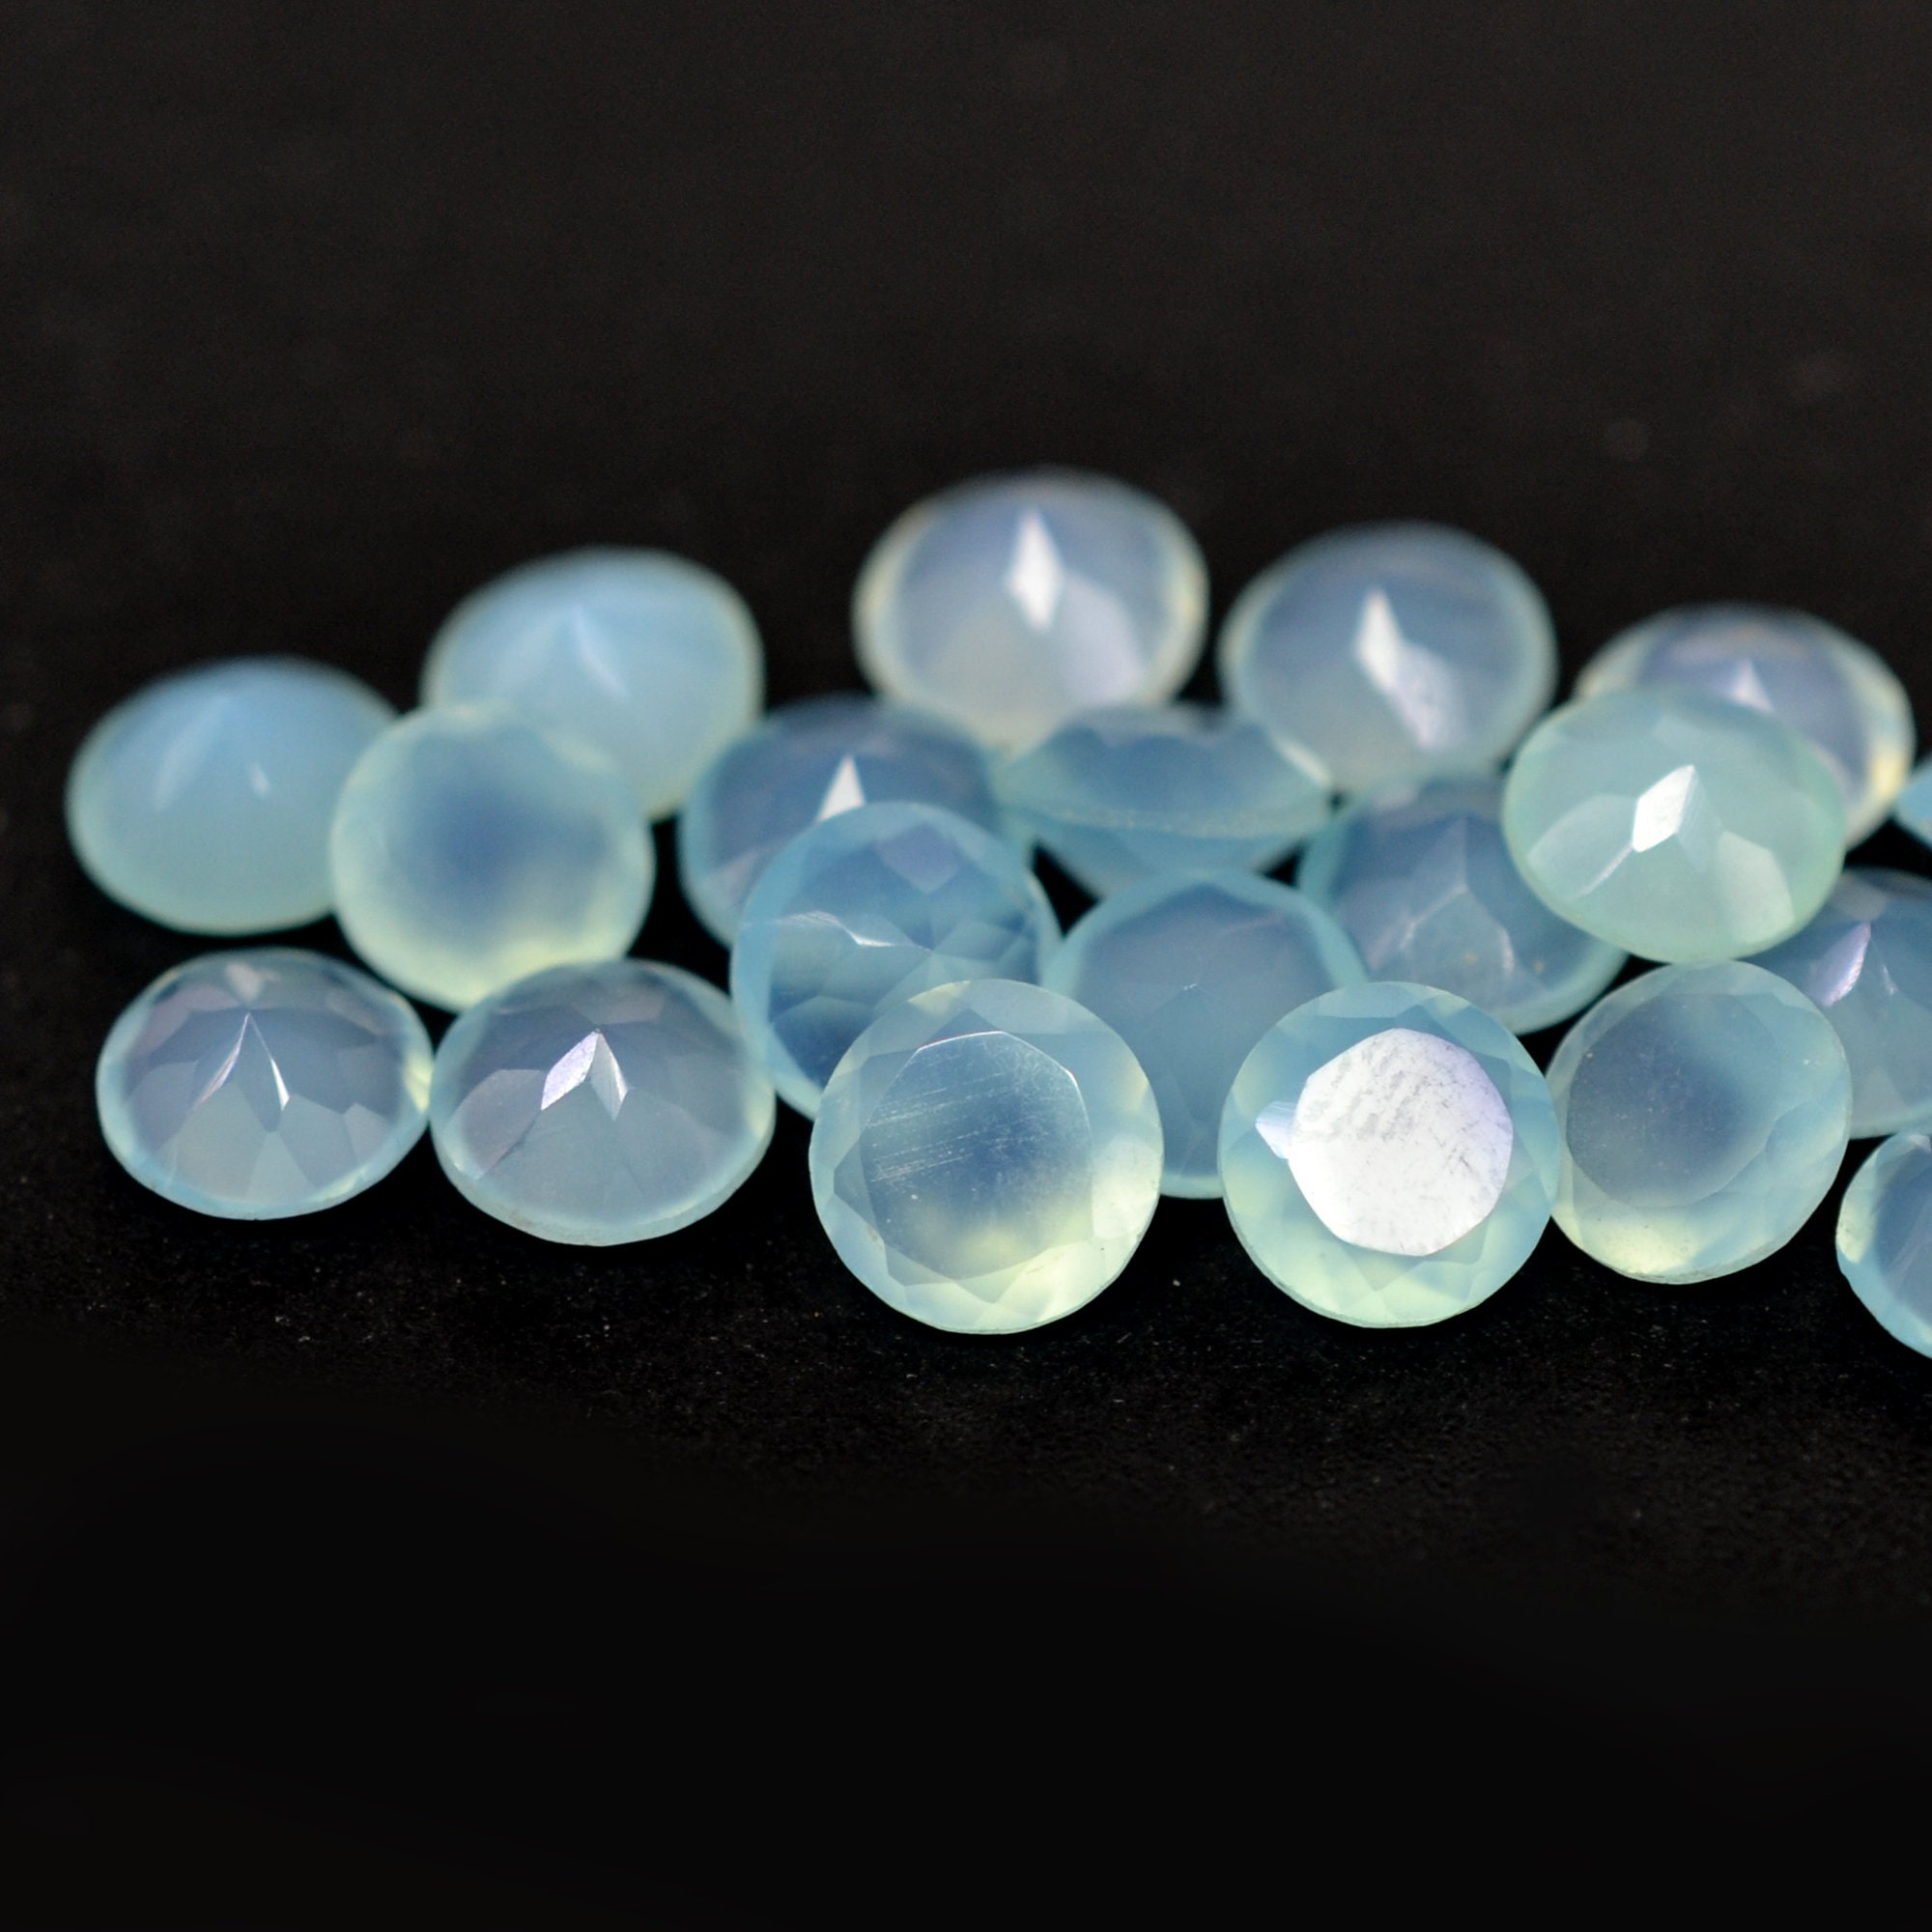 Chalcedony 6mm Round Faceted Cut Aqua Chalcedony Gemstone | Etsy